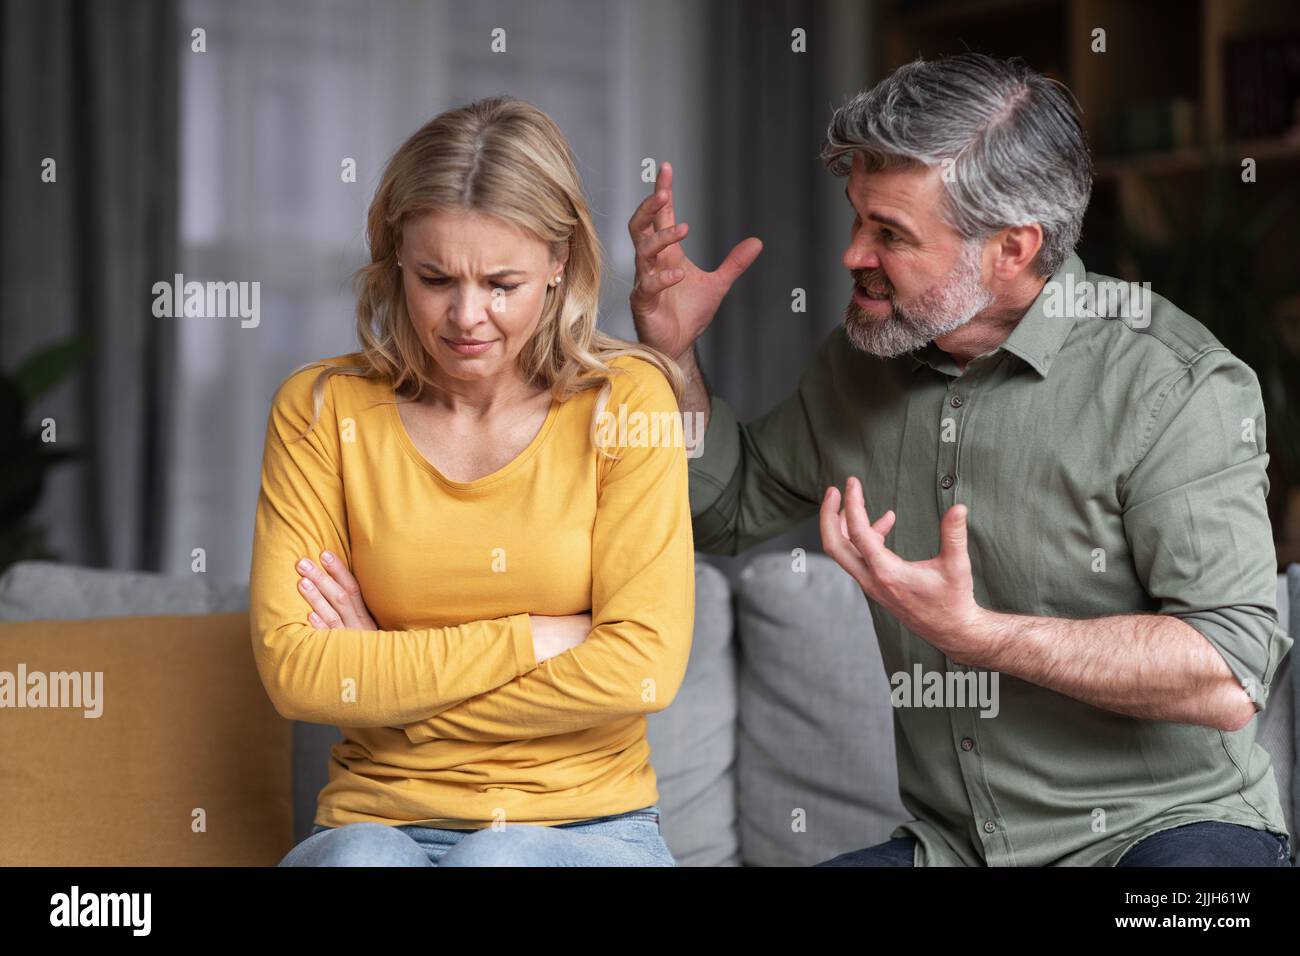 Aggressive Behavior. Portrait Of Abusive Husband Shouting At Wife At Home Stock Photo